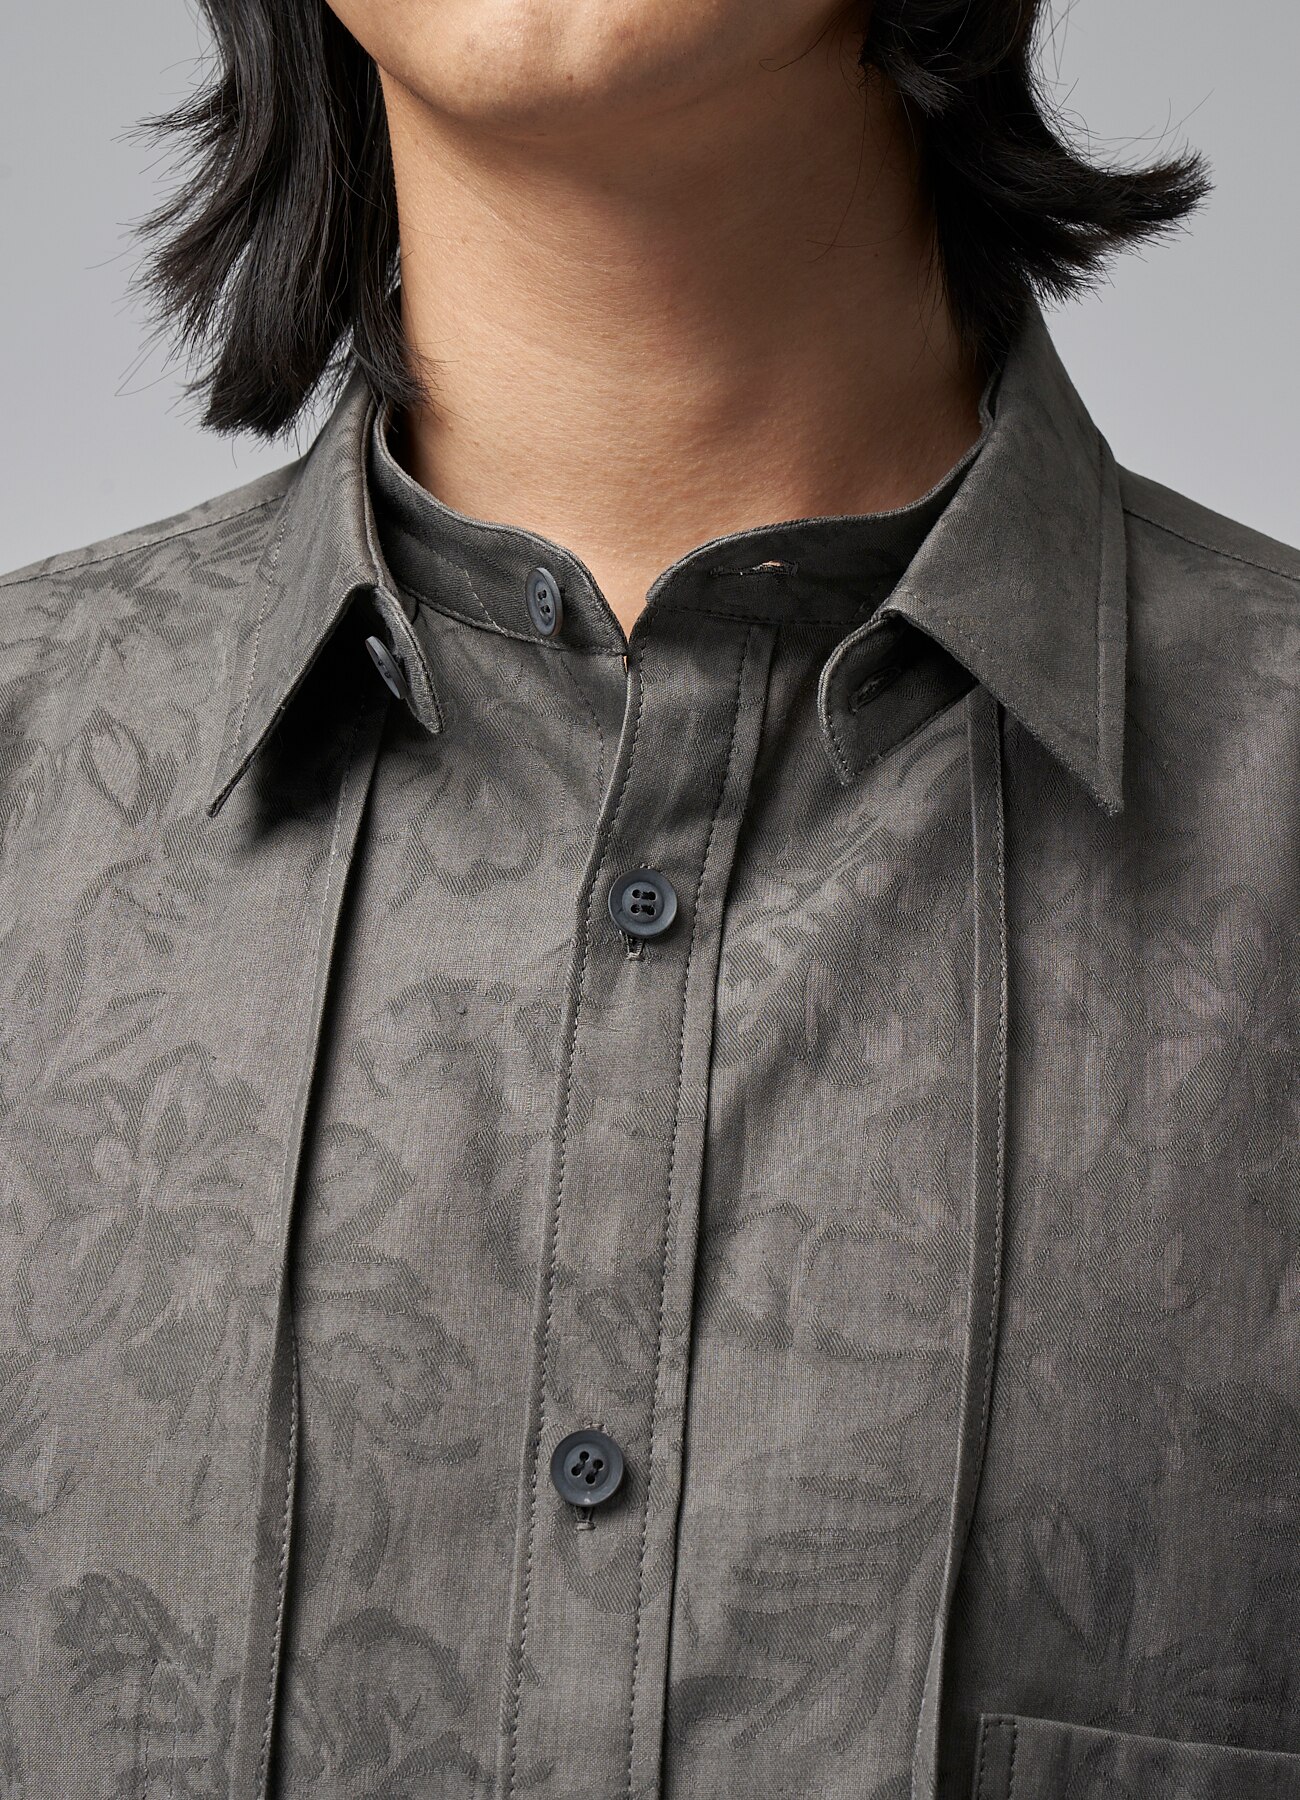 FLORAL JACQUARD SHIRT WITH COLLAR CORD DETAIL